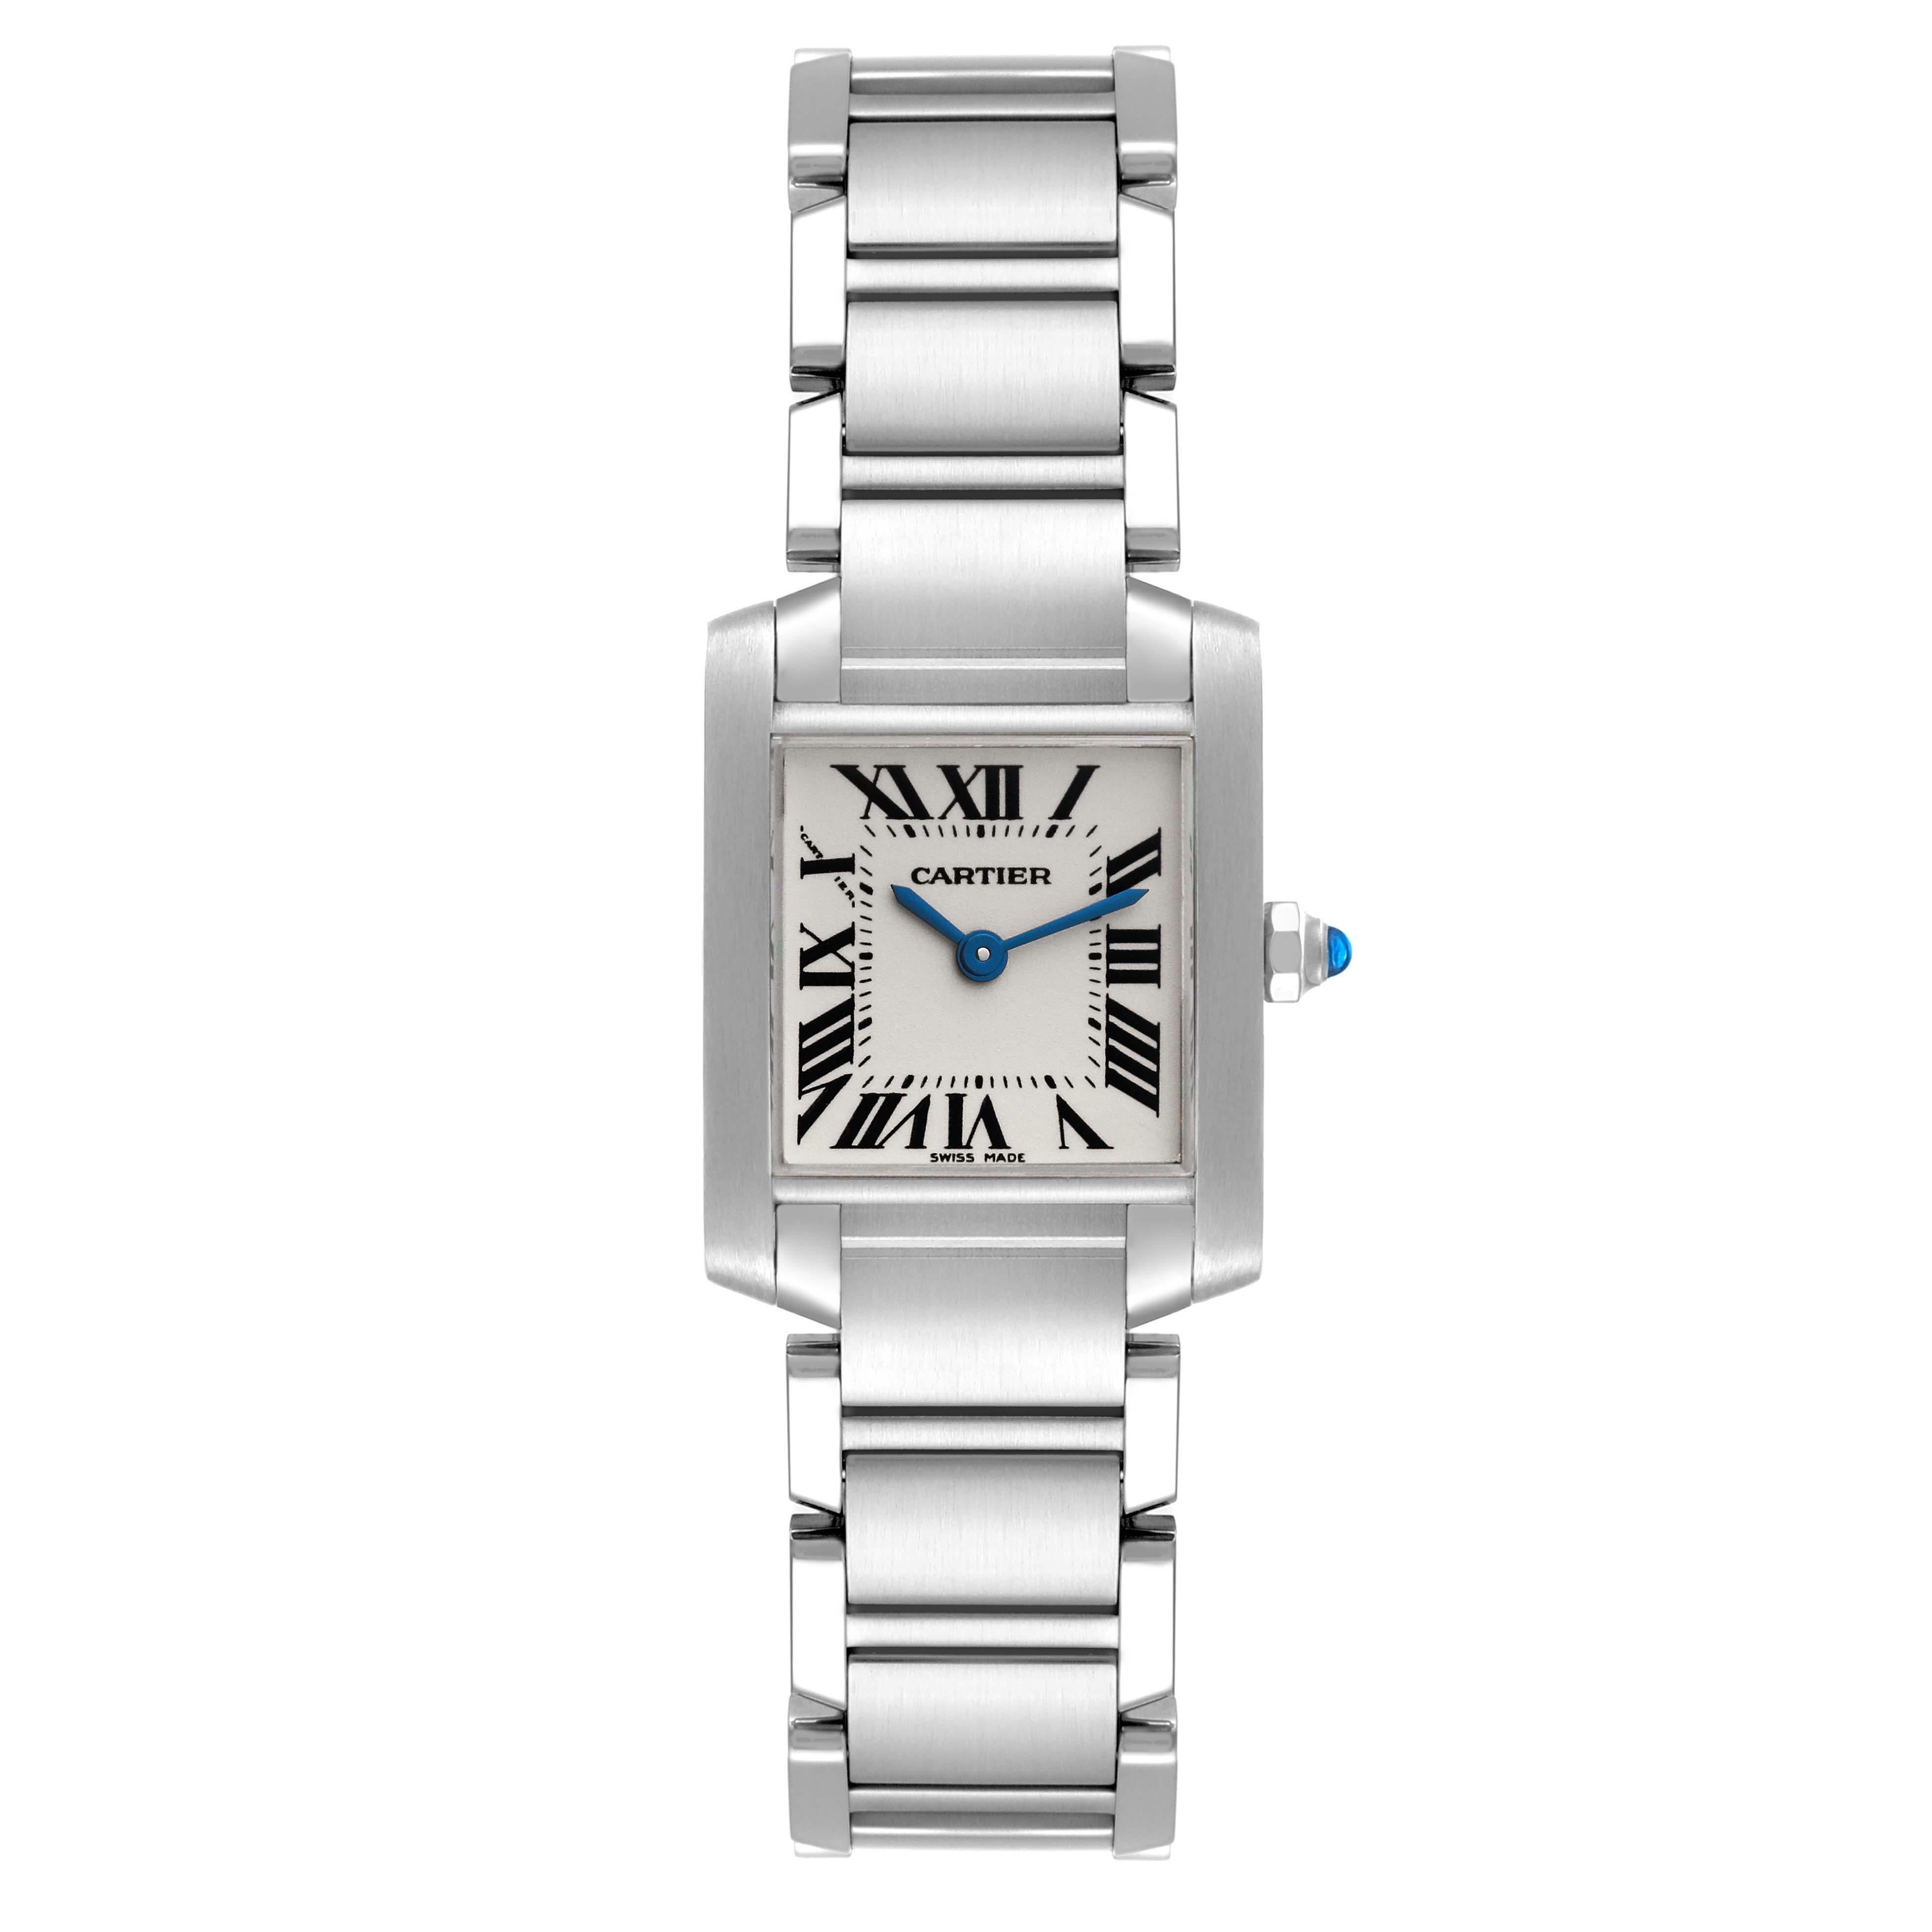 Cartier Tank Francaise Small Silver Dial Steel Ladies Watch W51008Q3. Quartz movement. Rectangular stainless steel 20.0 x 25.0 mm case. Octagonal crown set with a blue spinel cabochon. . Scratch resistant sapphire crystal. Silver opaline dial with